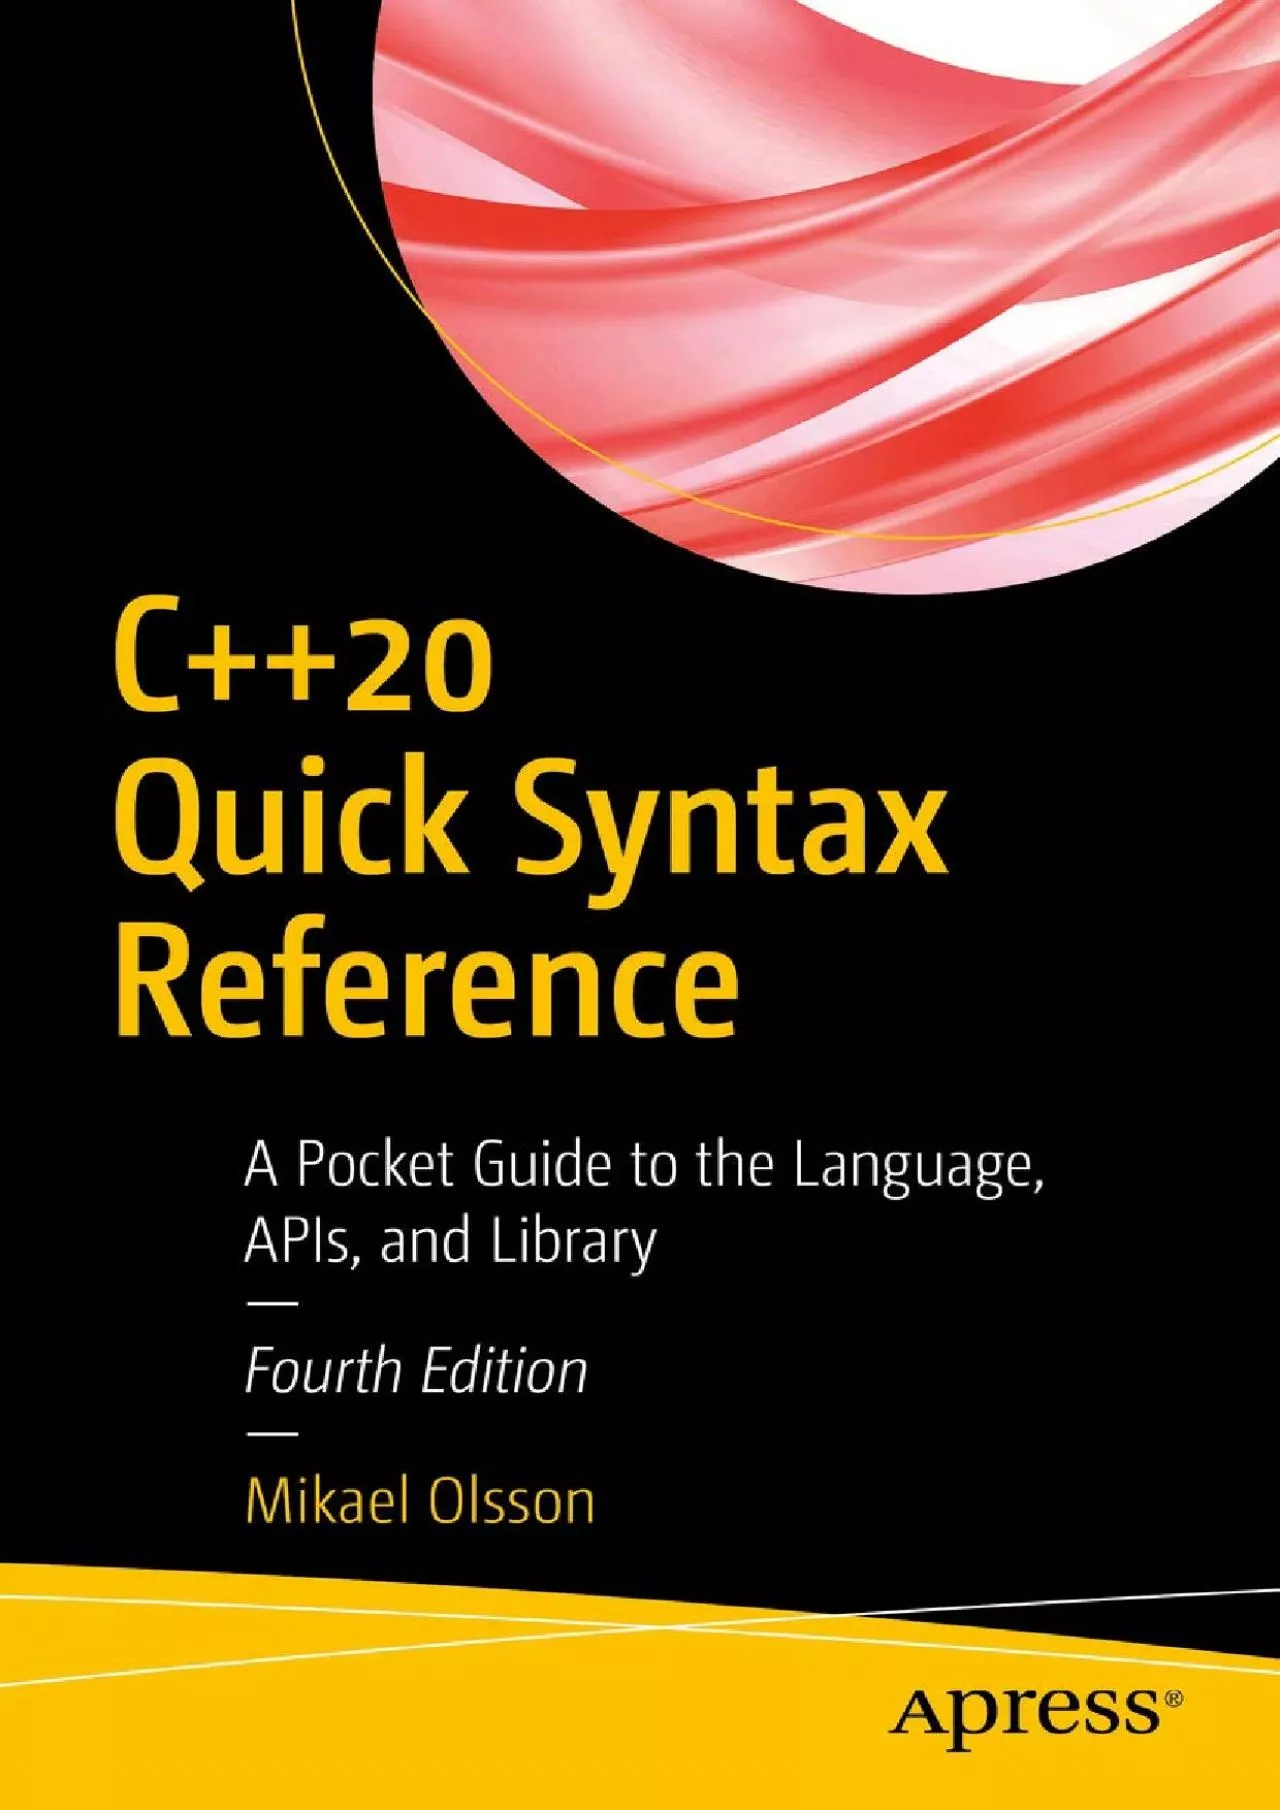 [FREE]-C++20 Quick Syntax Reference: A Pocket Guide to the Language, APIs, and Library